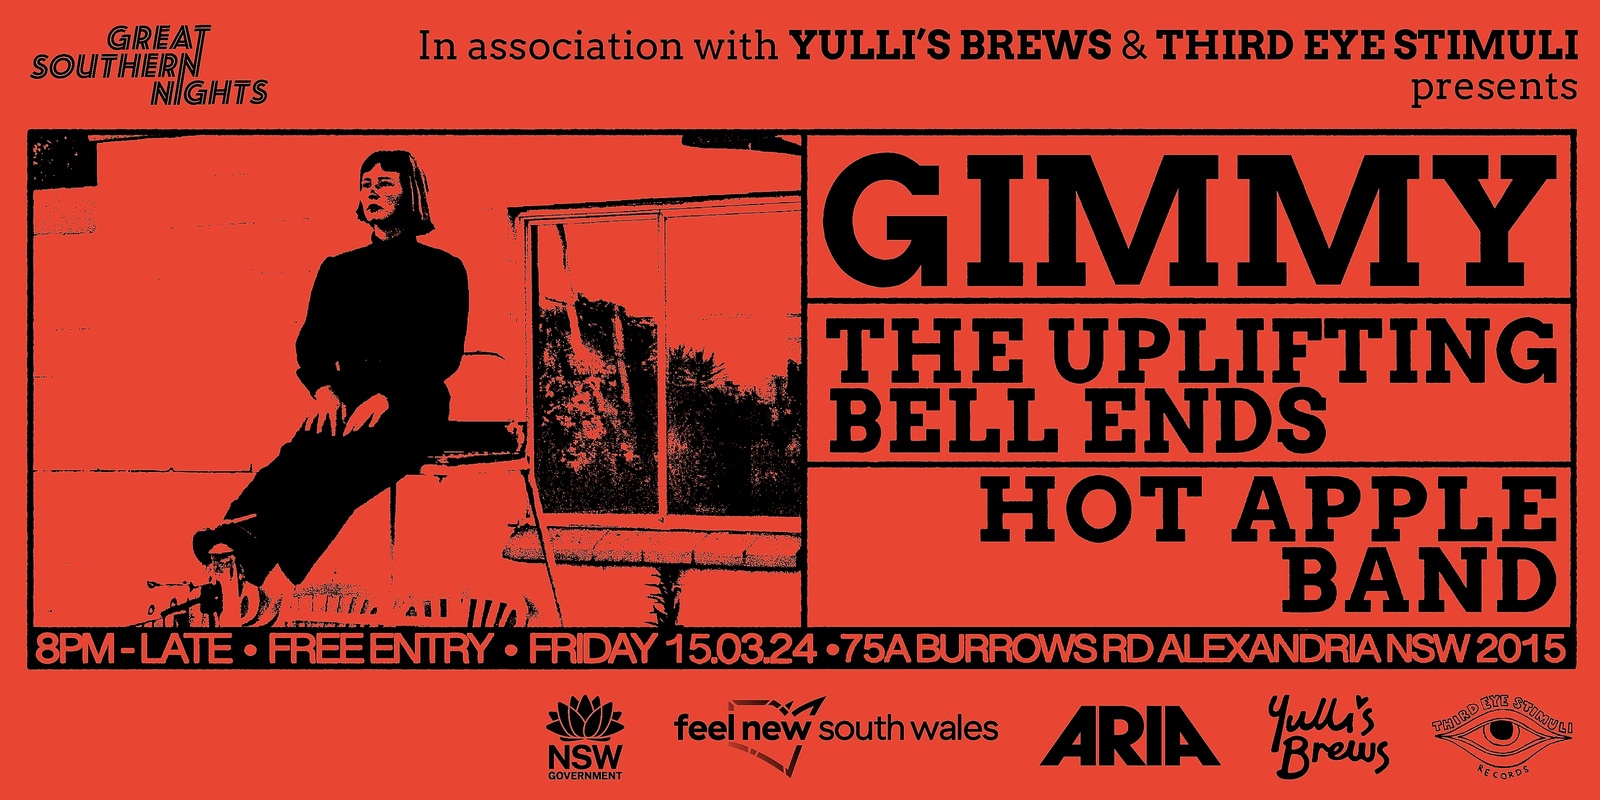 Banner image for Great Southern Nights, Third Eye Stimuli & Yulli's Brews present; GIMMY, The Uplifting Bell Ends & Hot Apple Band.